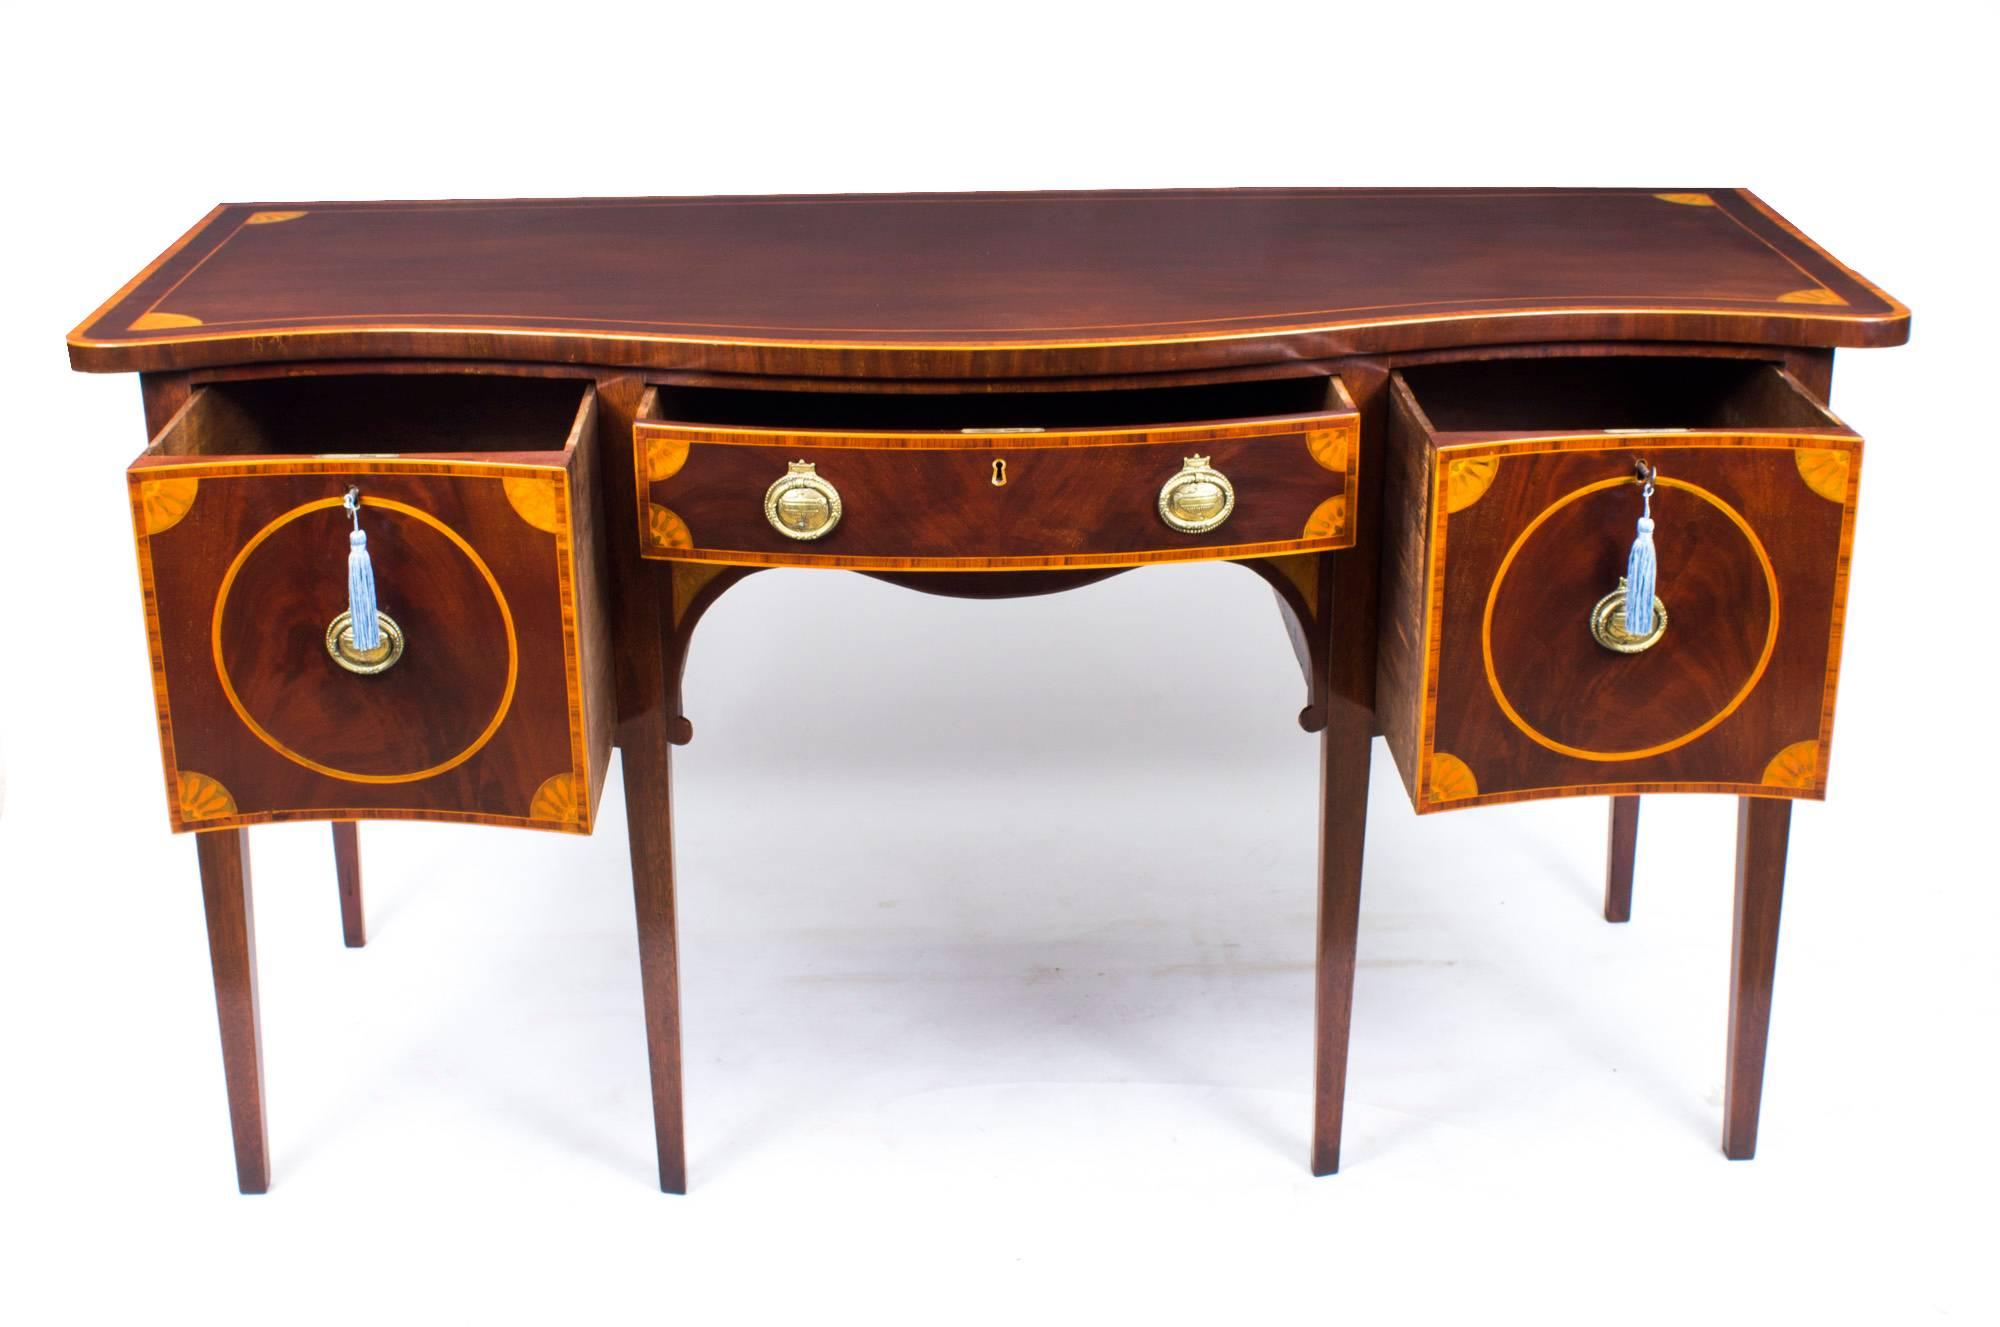 This is a superb Sheraton style flame mahogany serpentine sideboard with beautiful crossbanded and fan inlaid decoration, circa 1870 in date.

It has a central frieze drawer which is flanked by deep drawers, all with their original brass handles.